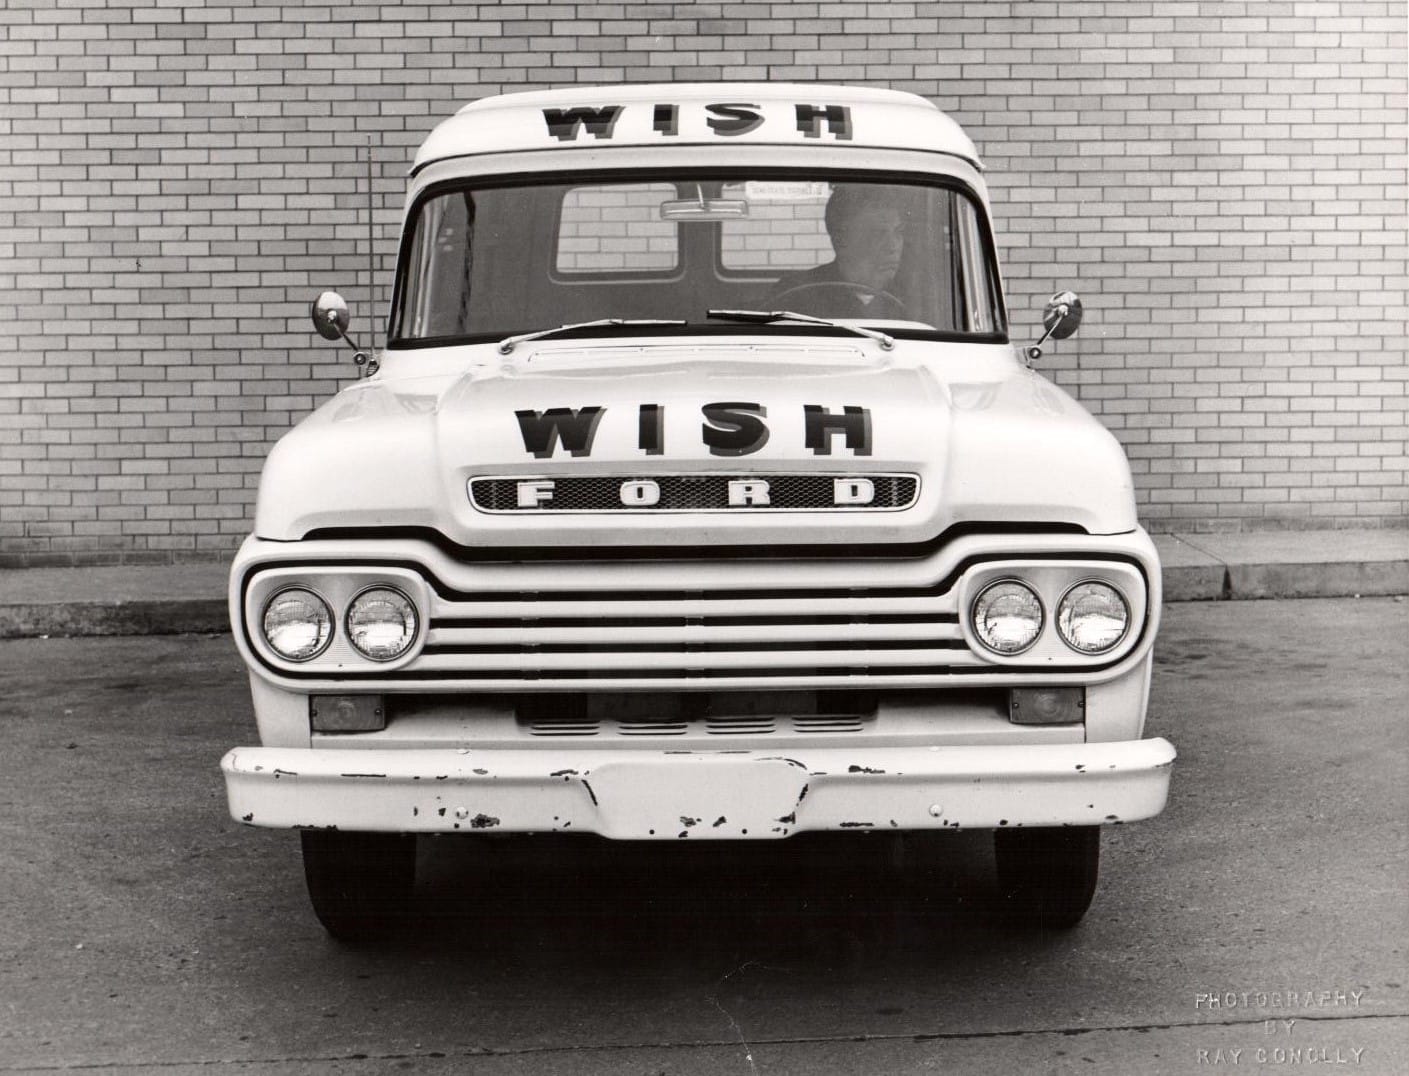 A Ford vehicle used in the 1960s/